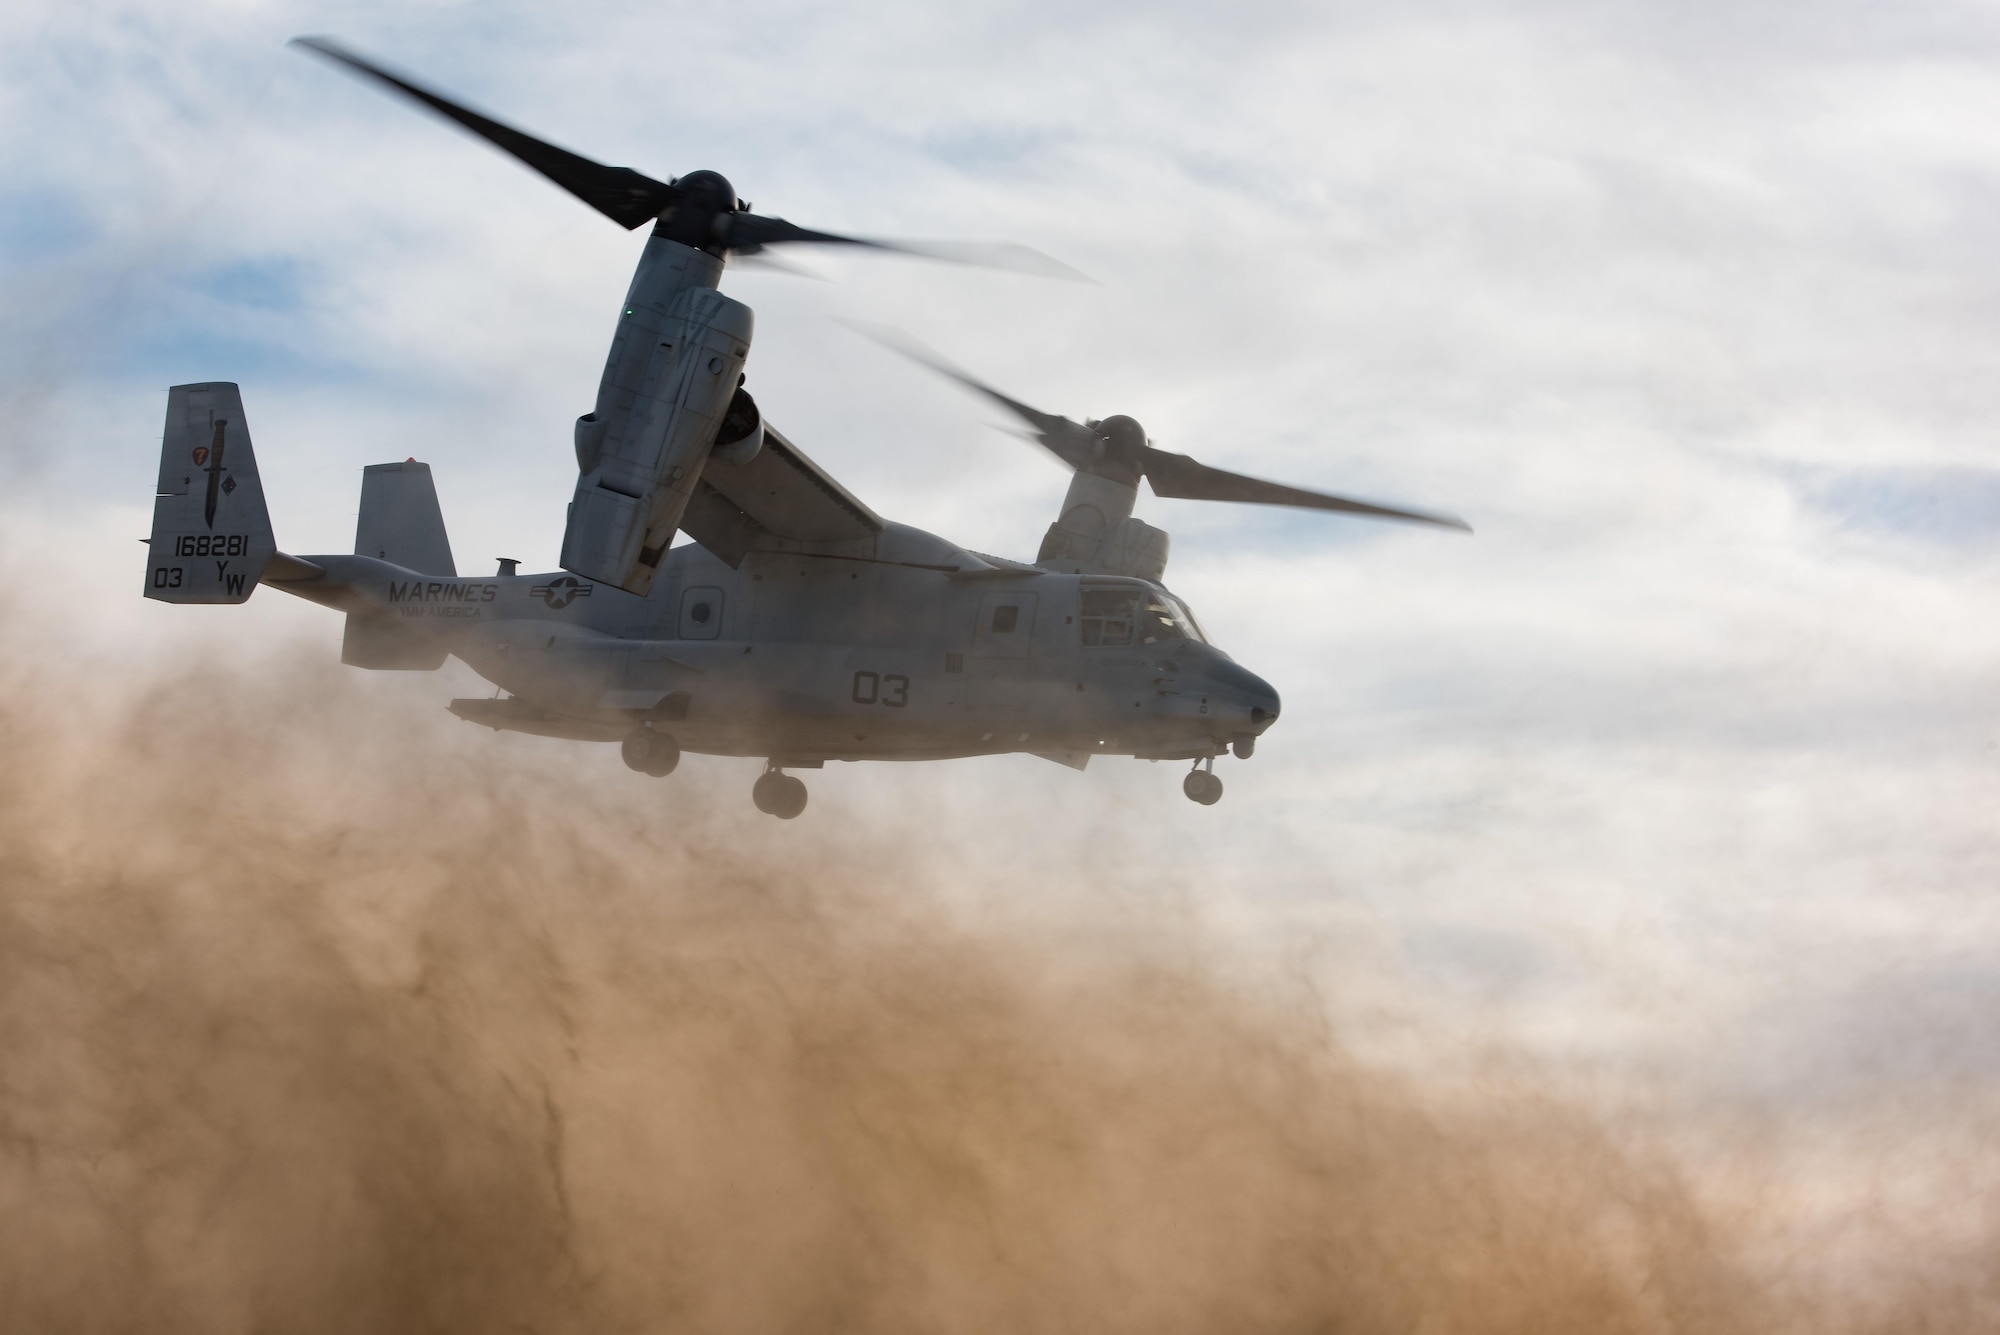 An MV-22 Osprey assigned to Marine Medium Tiltrotor Squadron 165 takes off during a mission exercising the tactical recovery of aircraft and personnel at an undisclosed location in Southwest Asia, April 5, 2017. The Marines assigned to the Special Purpose Marine Air-Ground Task Force-Crisis Response-Central Command regularly exercise the capability to keep their skills sharp while in the USCENTCOM’s area of operations. (U.S. Air Force photo/Master Sgt. Benjamin Wilson)(Released)